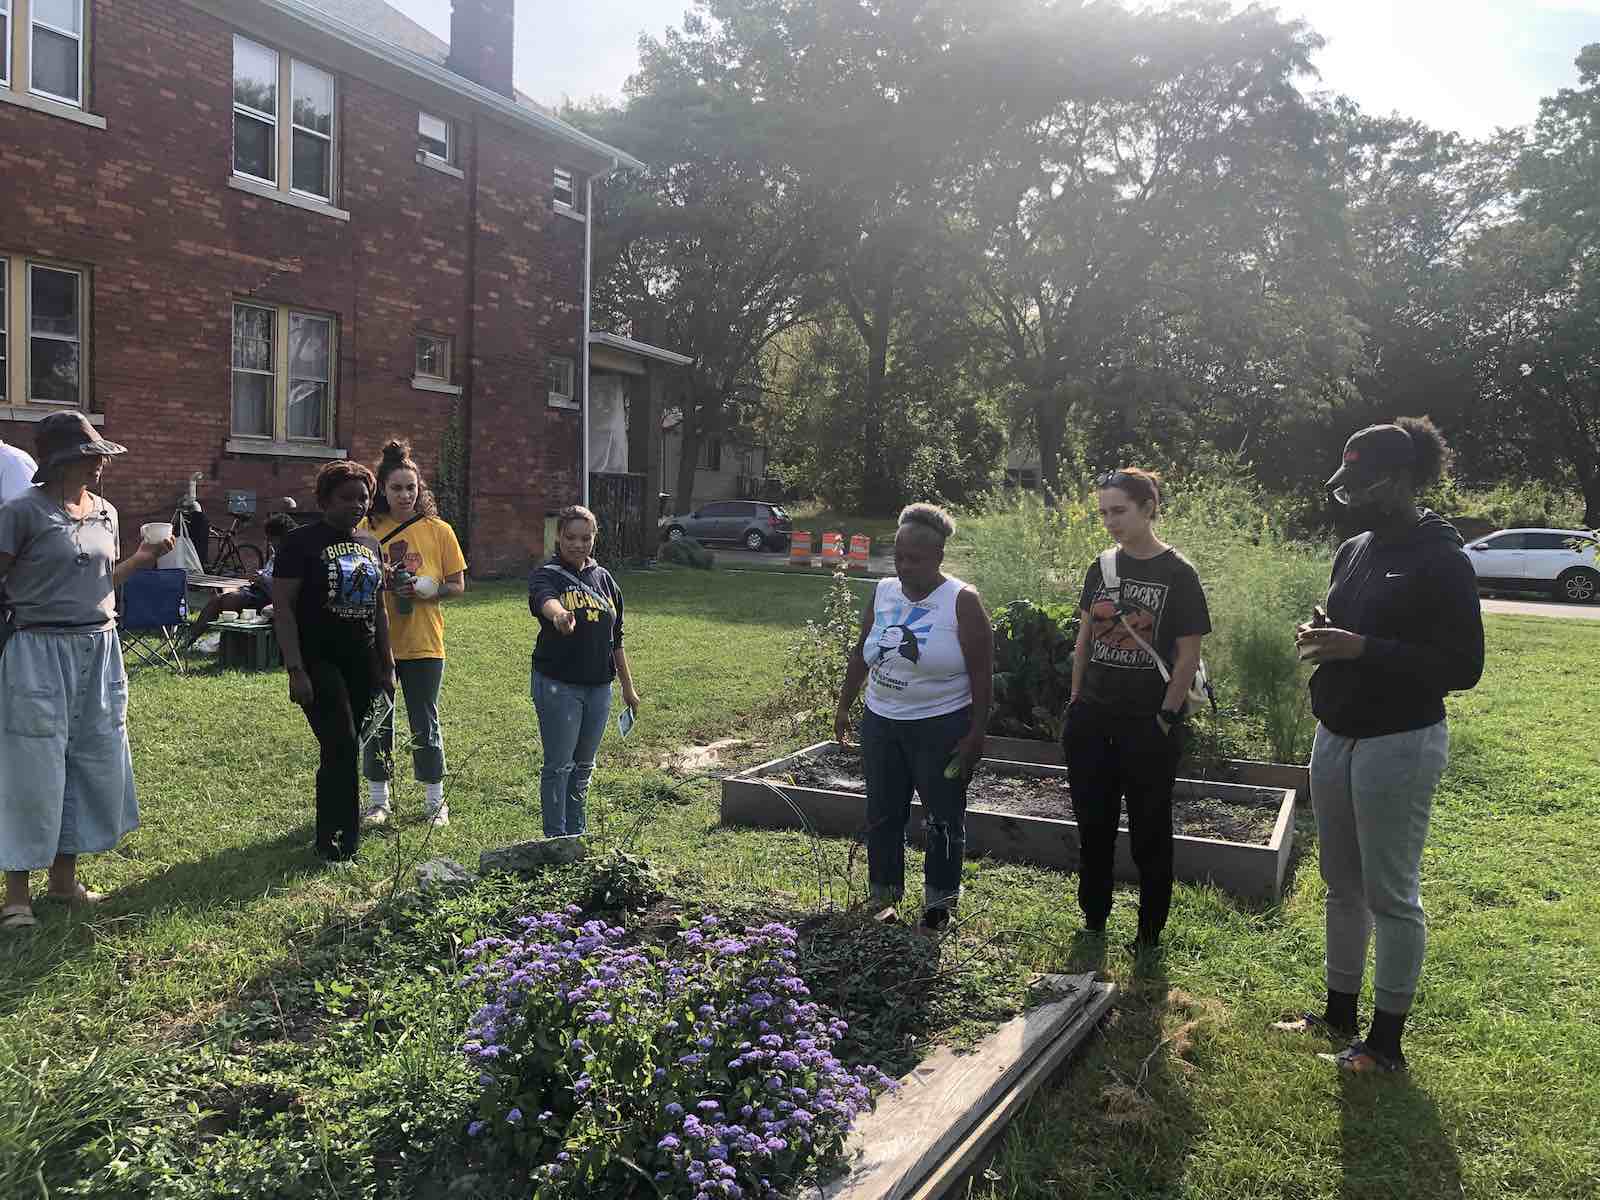 College students and a community member check out a community garden in an open lot next to a brick house in a Detroit neighborhood